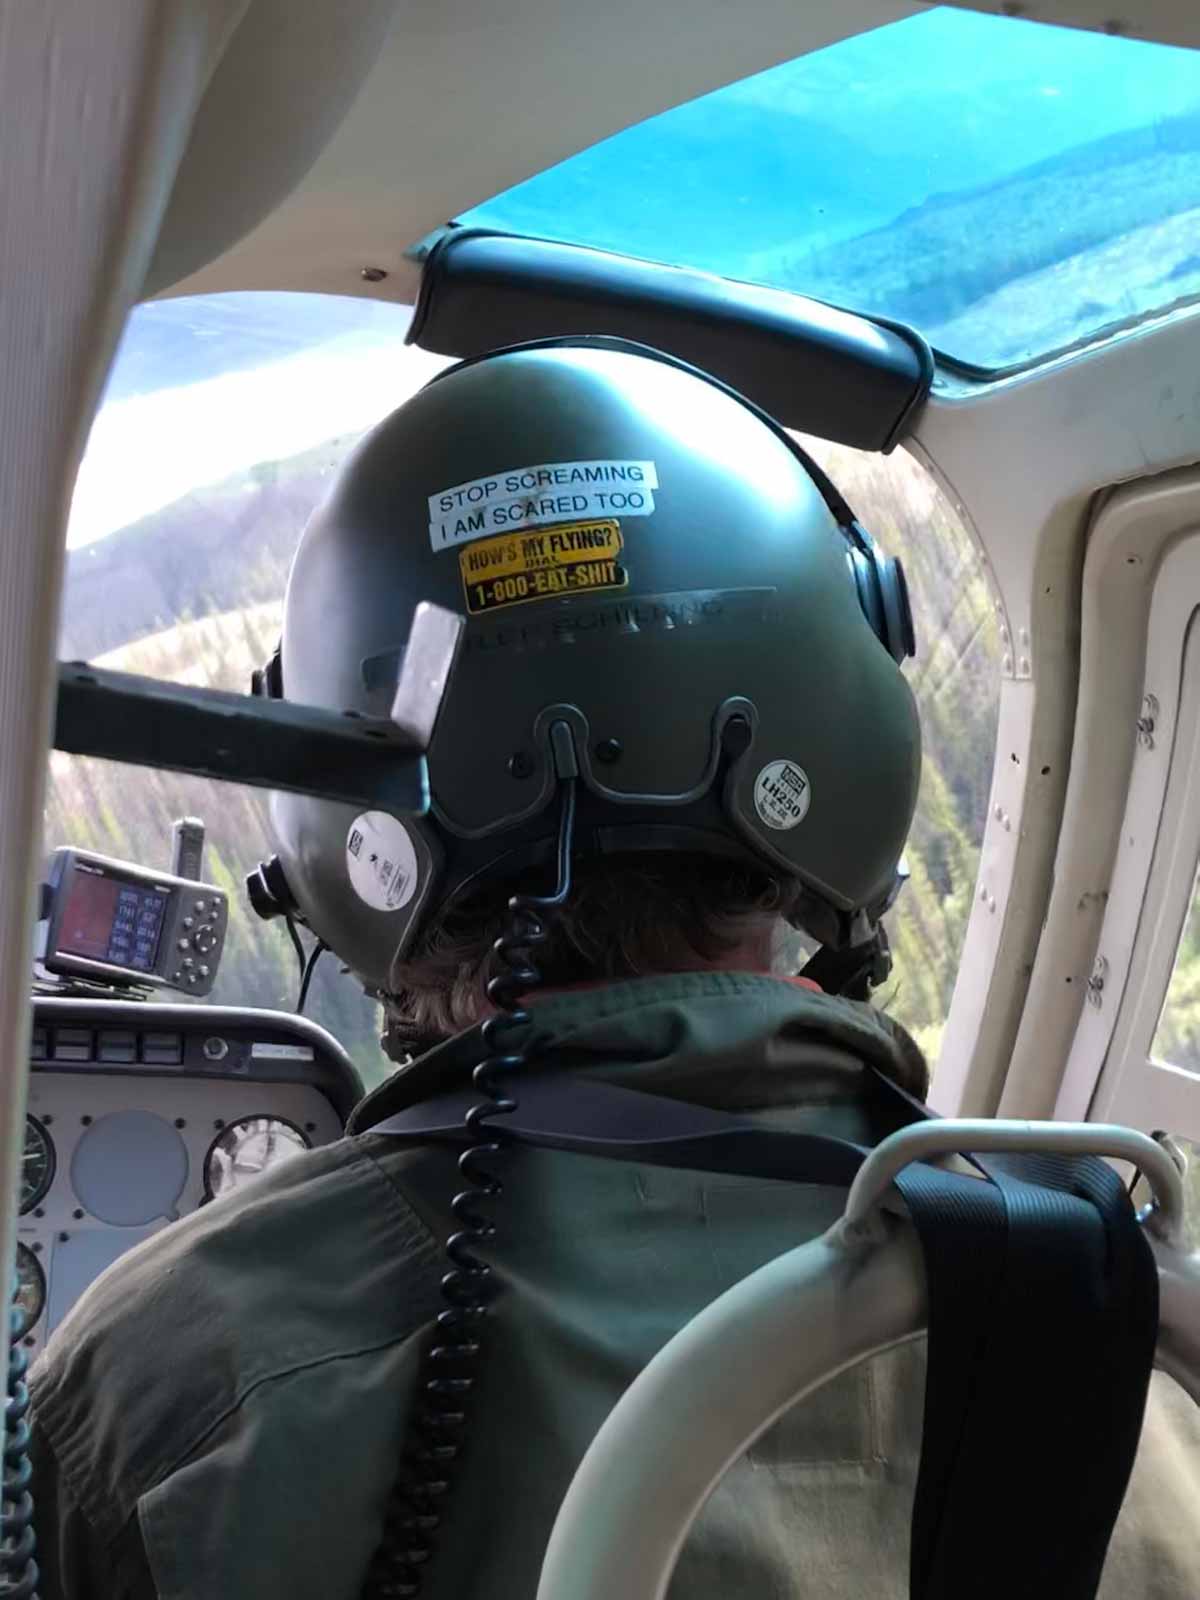 Funny pilot helmet that says 'stop screaming i am scared too'